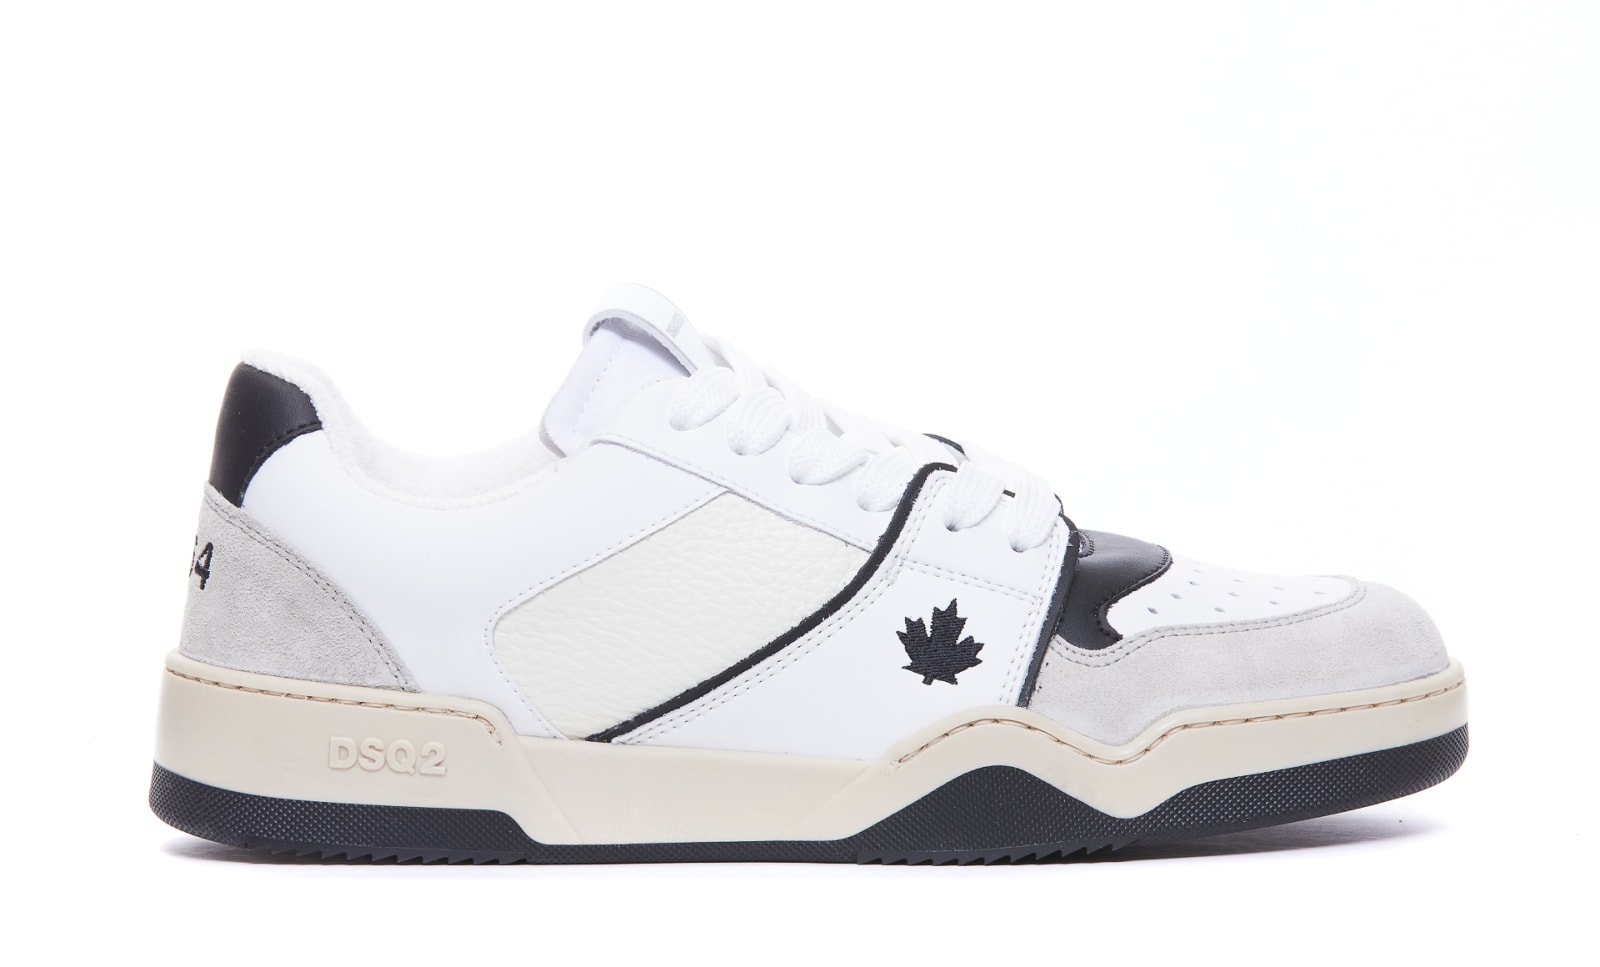 Dsquared2 Spiker Sneakers In White, Black